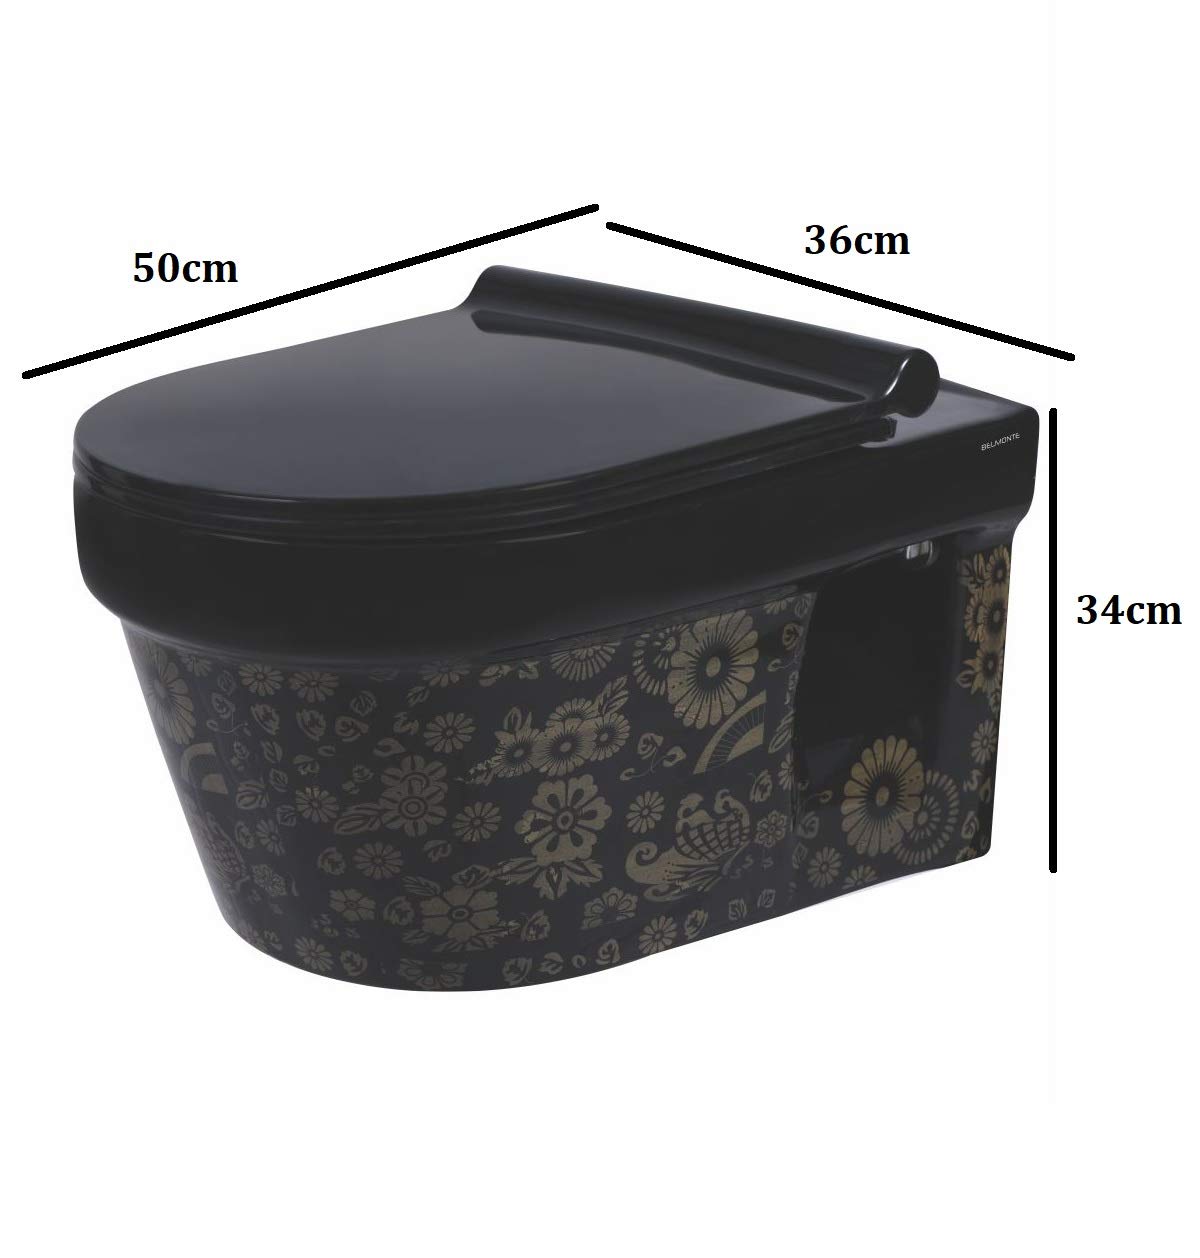 B Backline Ceramic Wall Mount Wall Hung Western Toilet Rimless Commode 20 X 14 X 13 Inches Printed Black